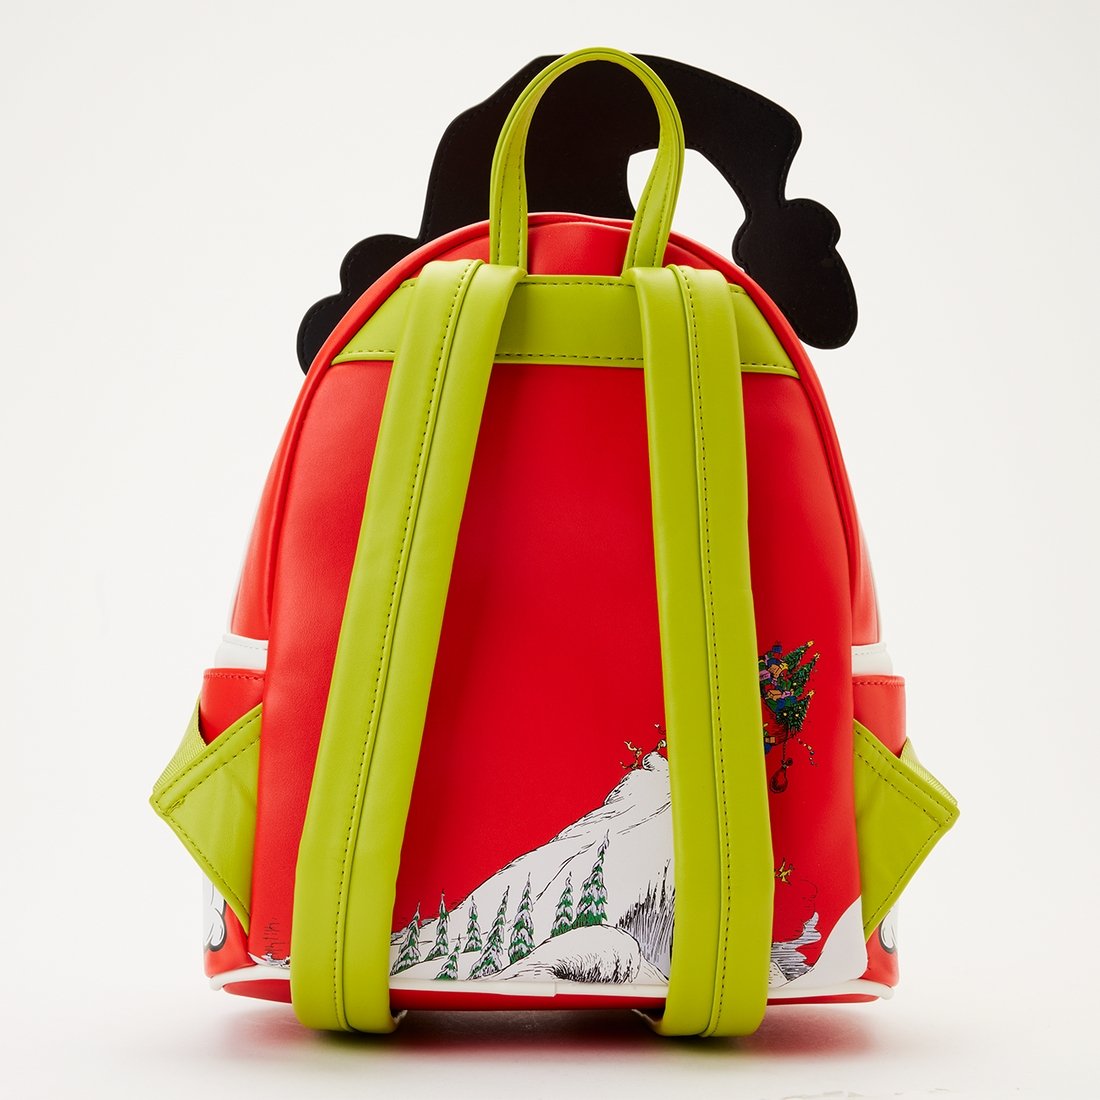 The Grinch Lenticular Heart Mini Backpack - Dr Seuss - Rockamilly-Bags & Purses-Vintage